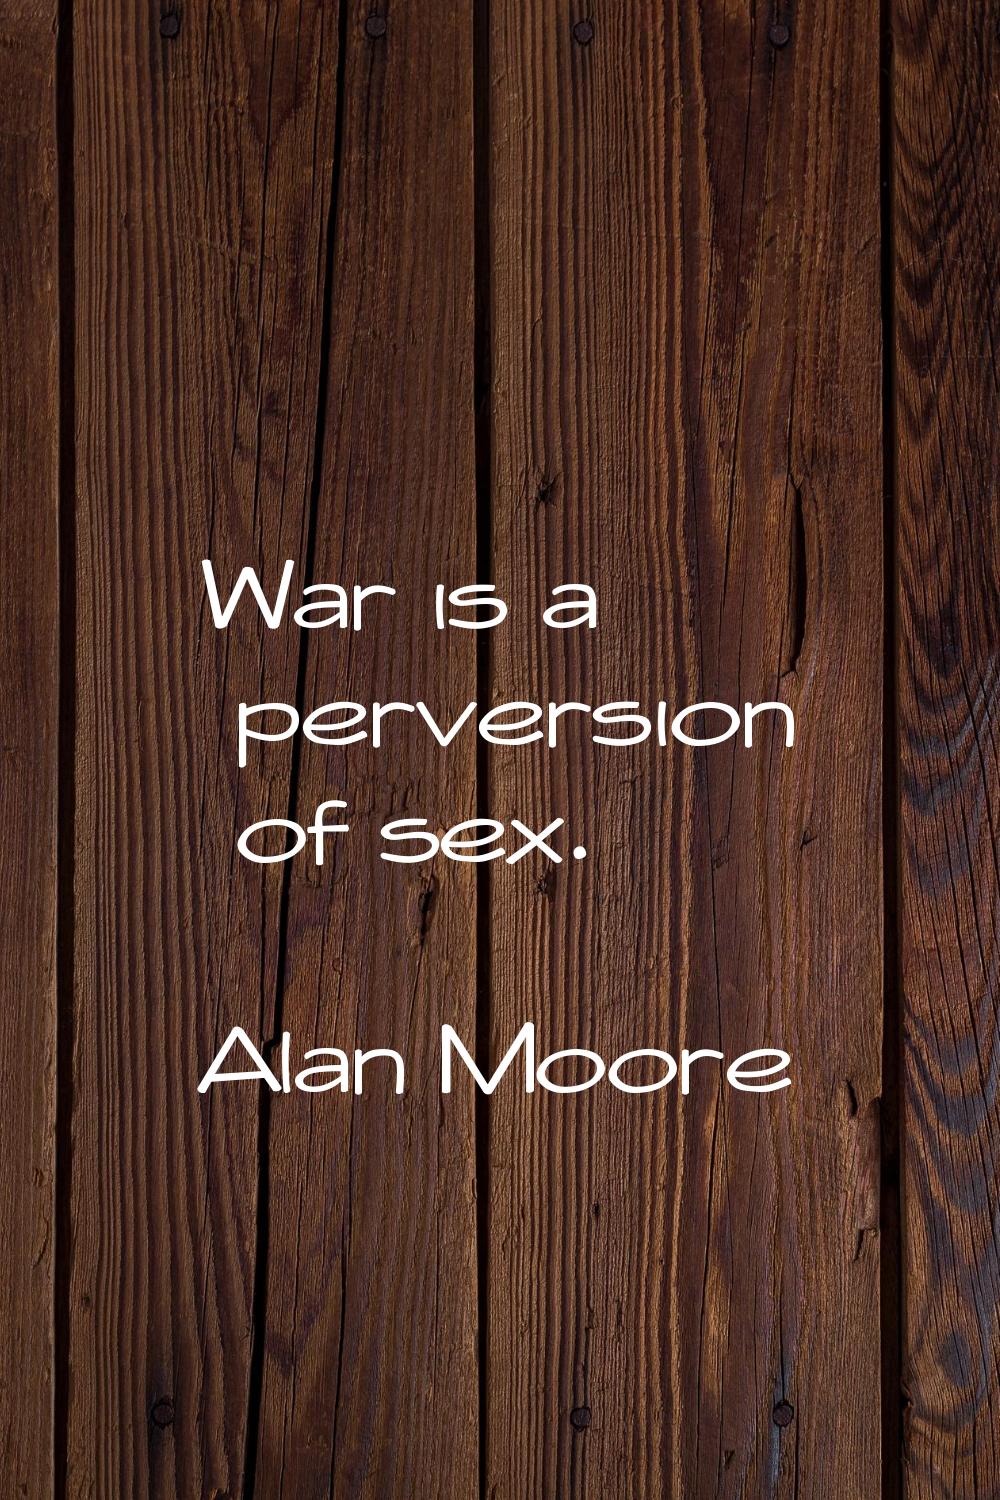 War is a perversion of sex.